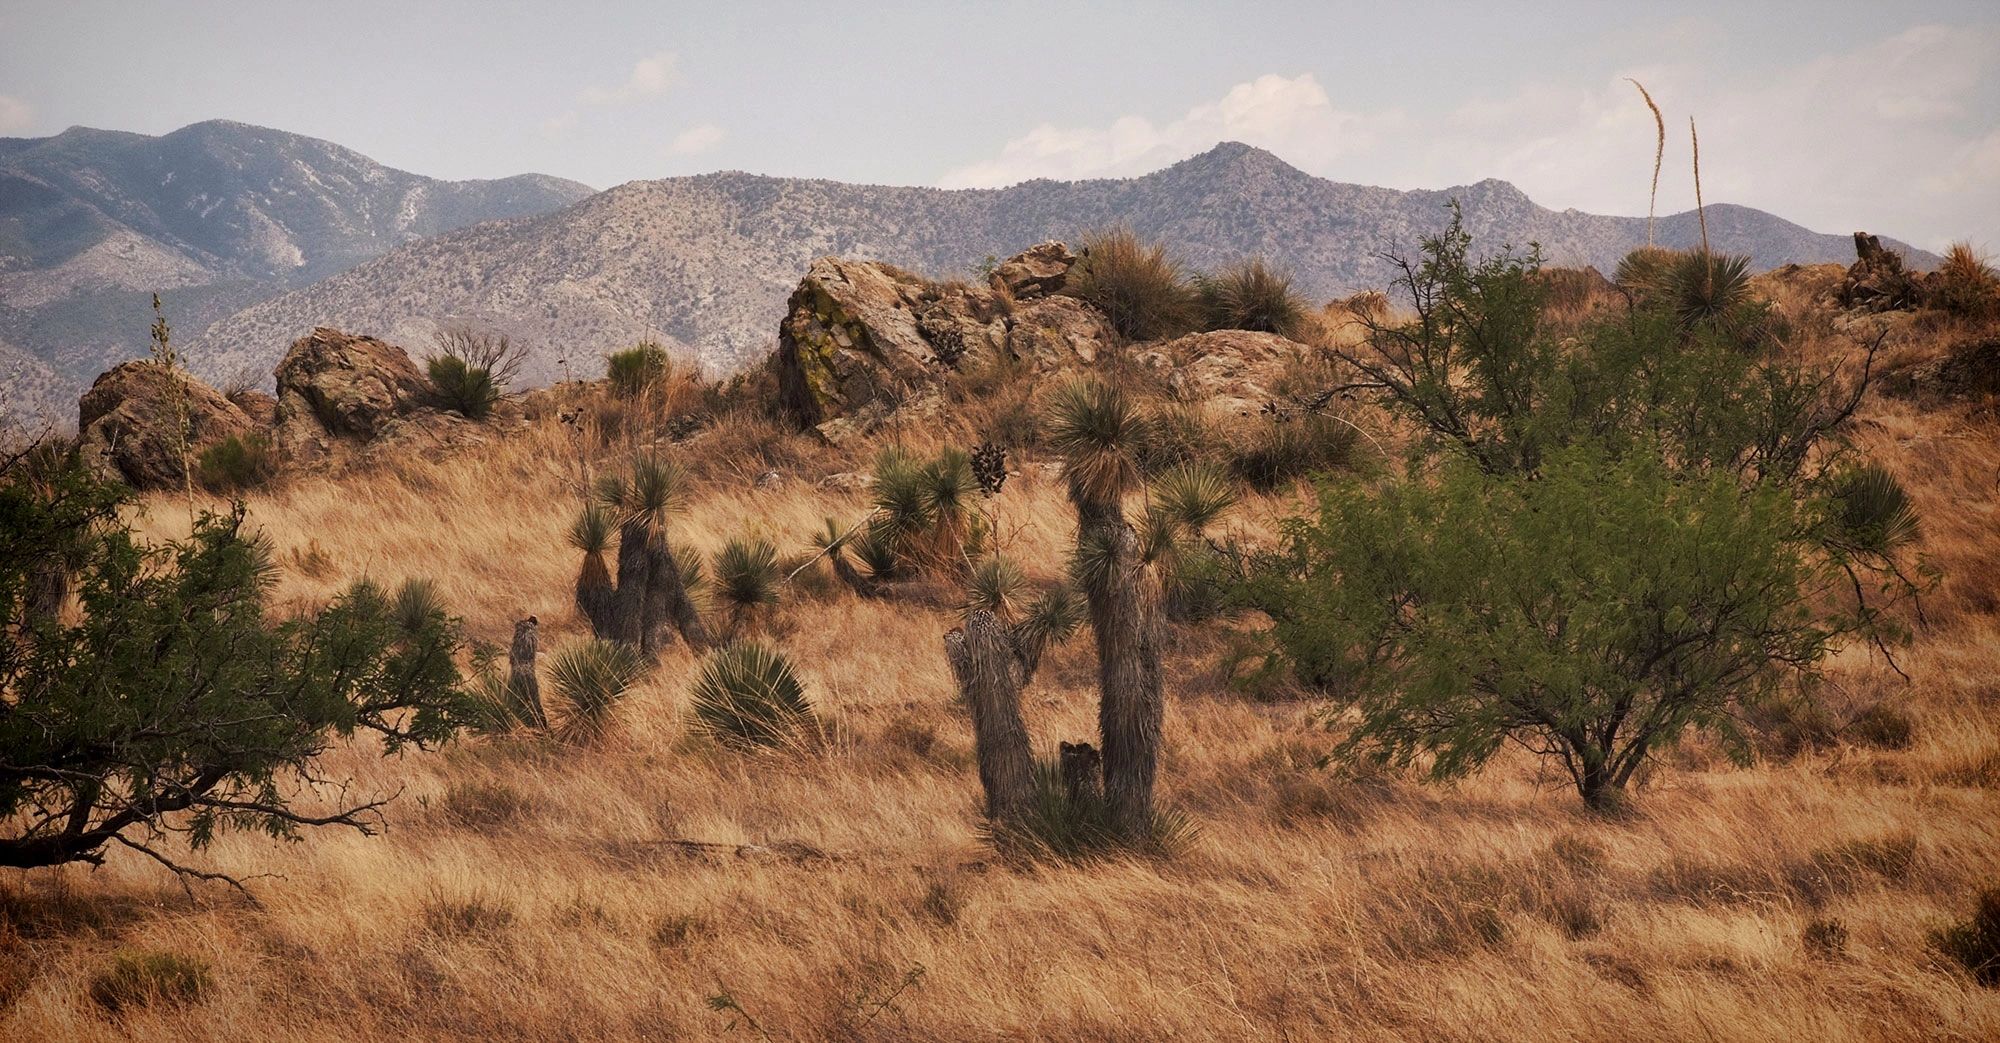 Dragoon, AZ, is noted for its rock formations, but the desert grasses and scrub trees are just as in